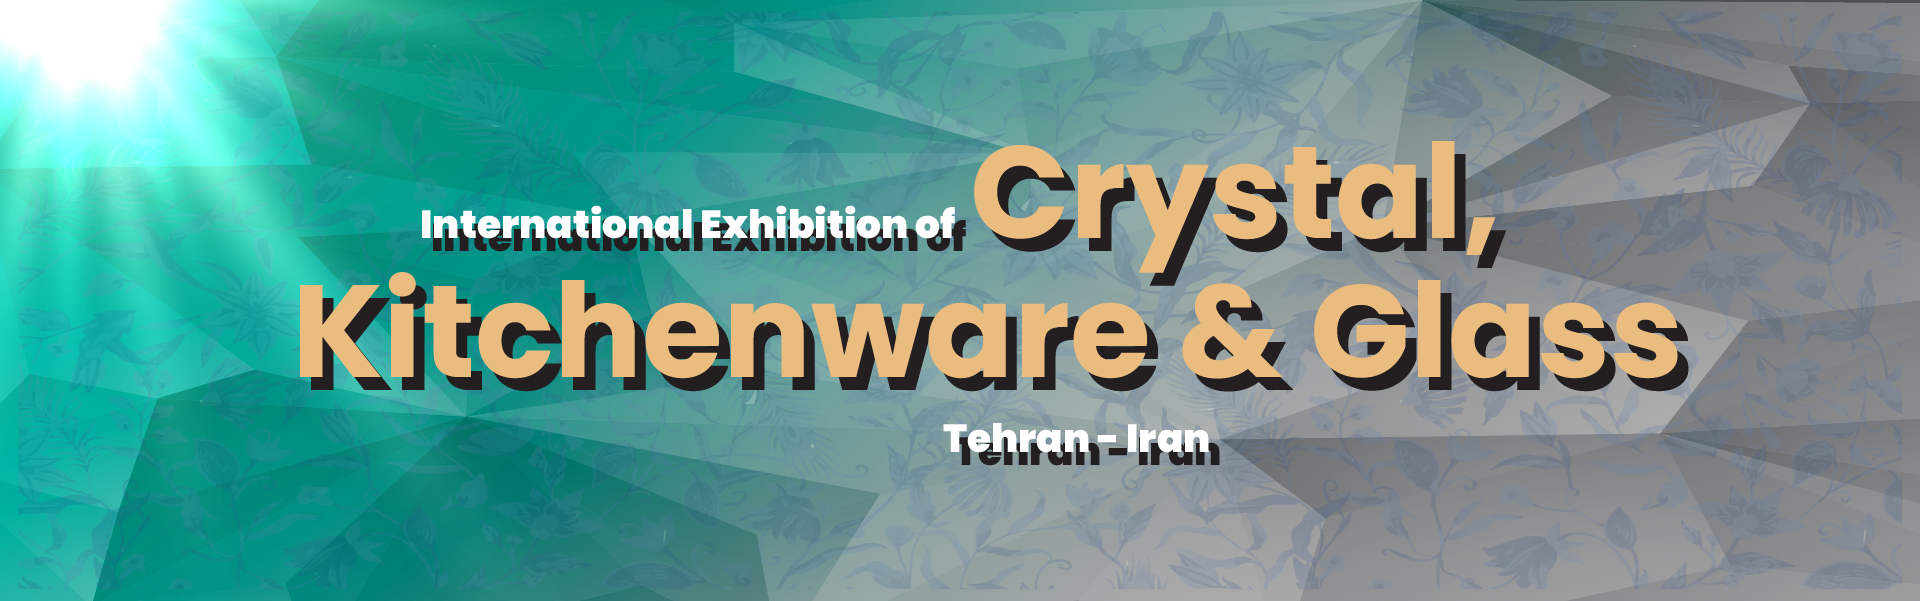 Porcelain ceramic glass and crystal dishes Exhibition Iran